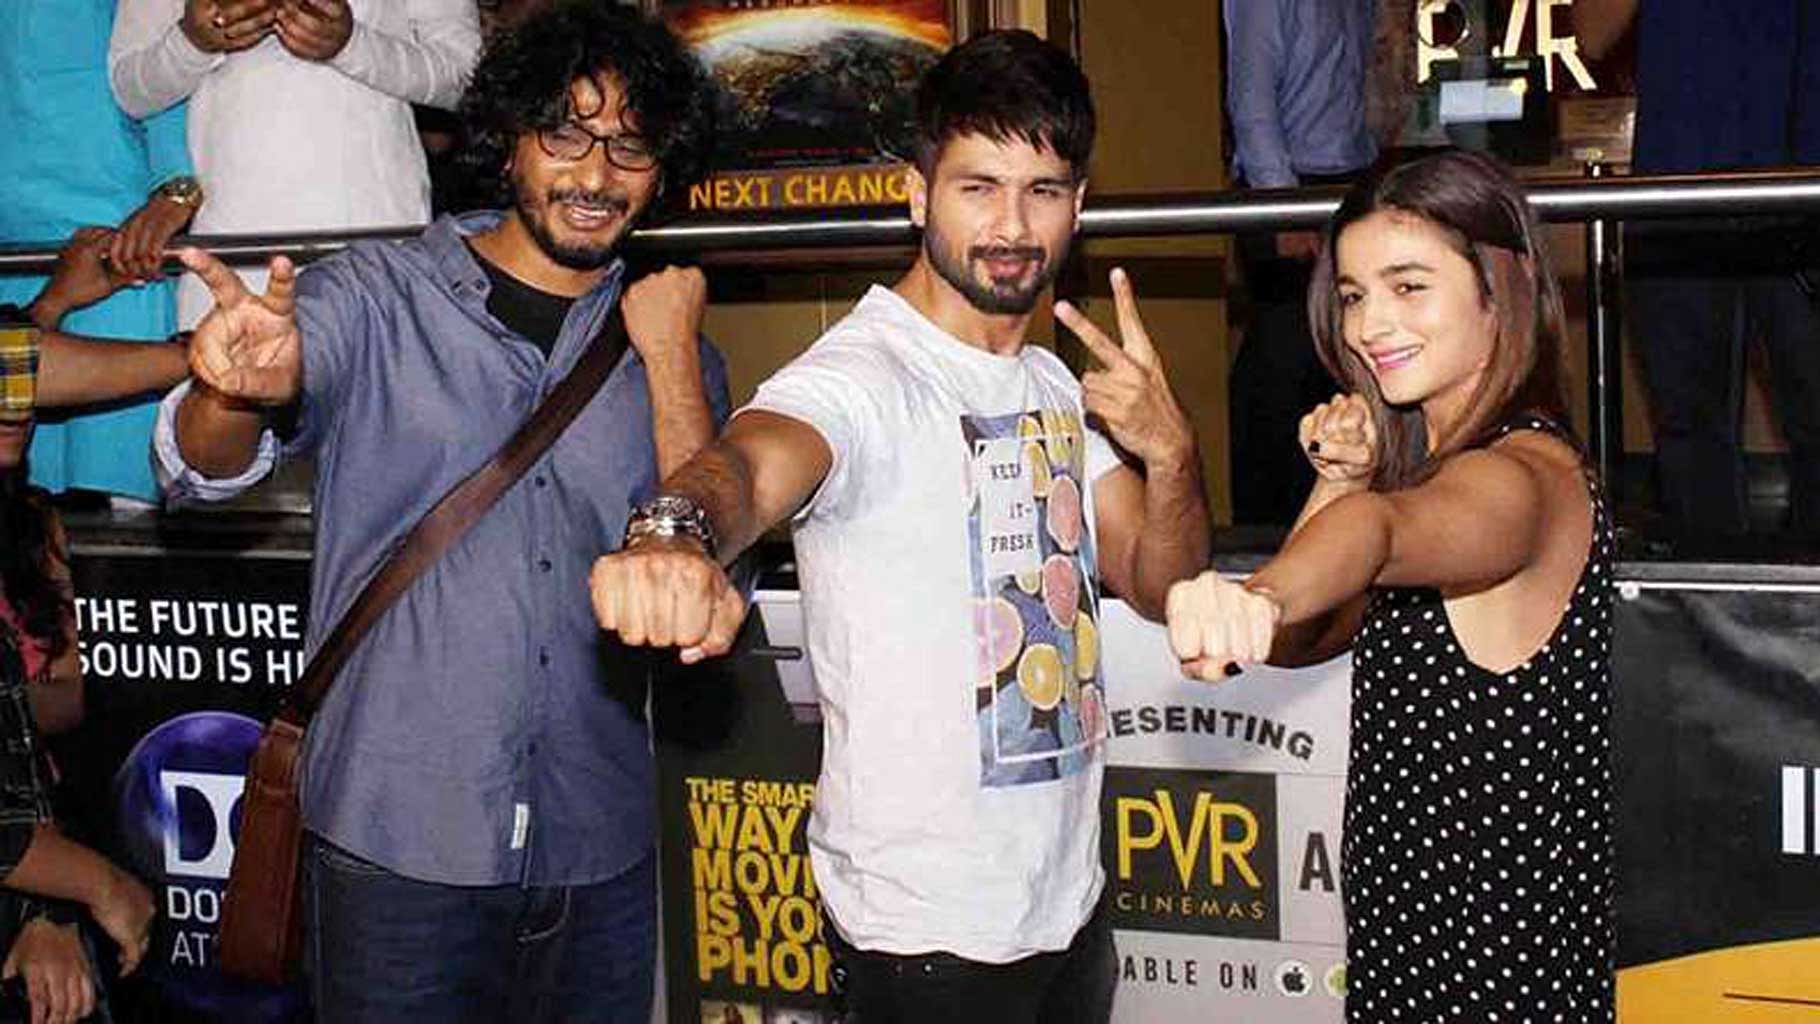 <i>Udta Punjab</i> director Abhishek Chaubey poses with Shahid Kapoor and Alia Bhatt at a promotional event for the film (Photo: Yogen Shah)